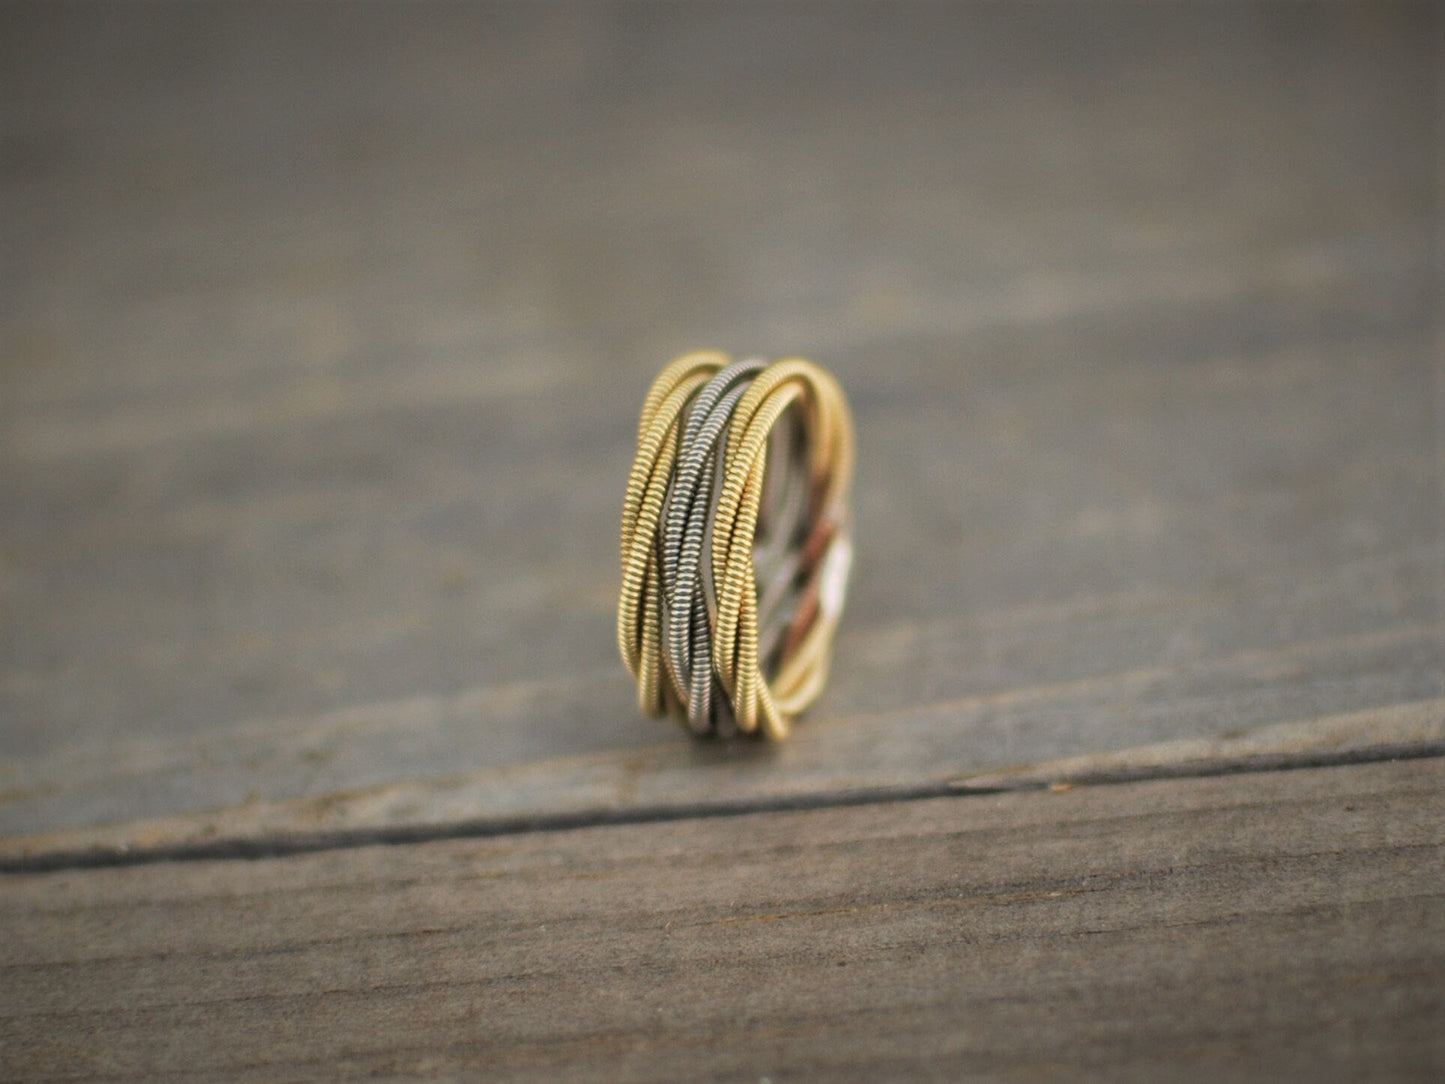 3 Stacked Guitar String Rings, Silver Ring, Guitar String Jewelry, Stacked Ring, Stacking Rings, Gift for Him, Gift for Musician, Music Gift